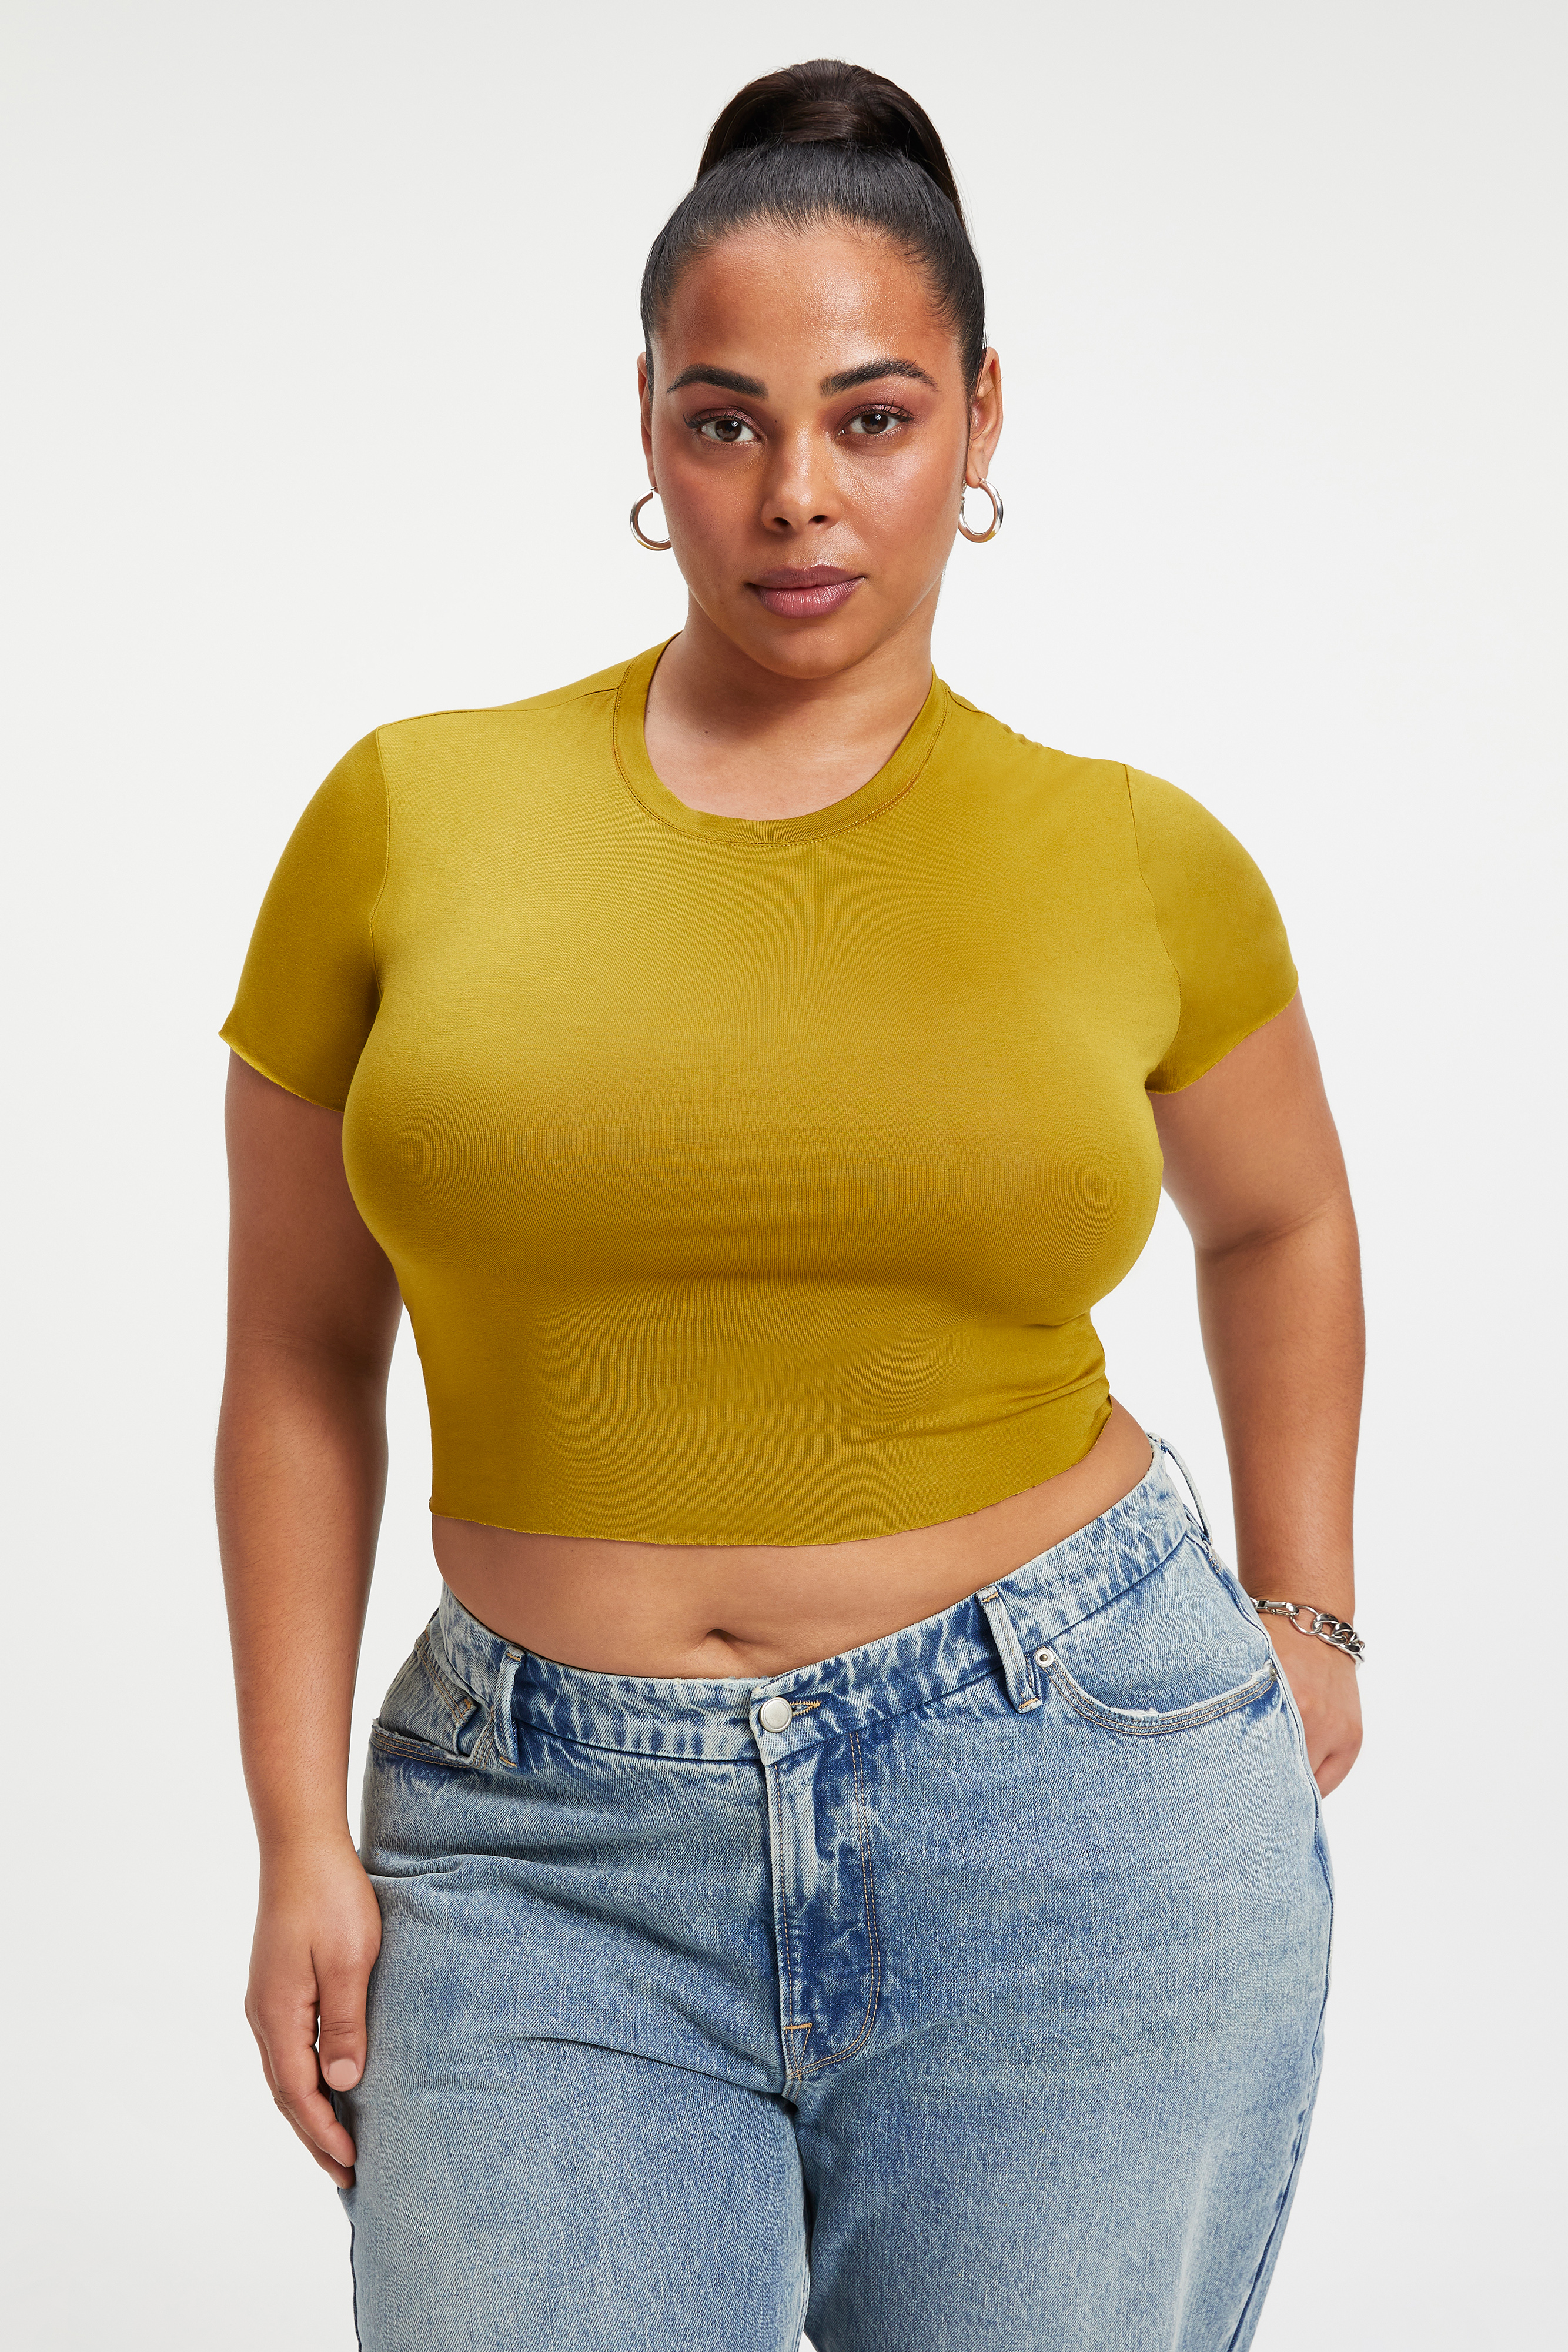 Types of Crop tops you must have!